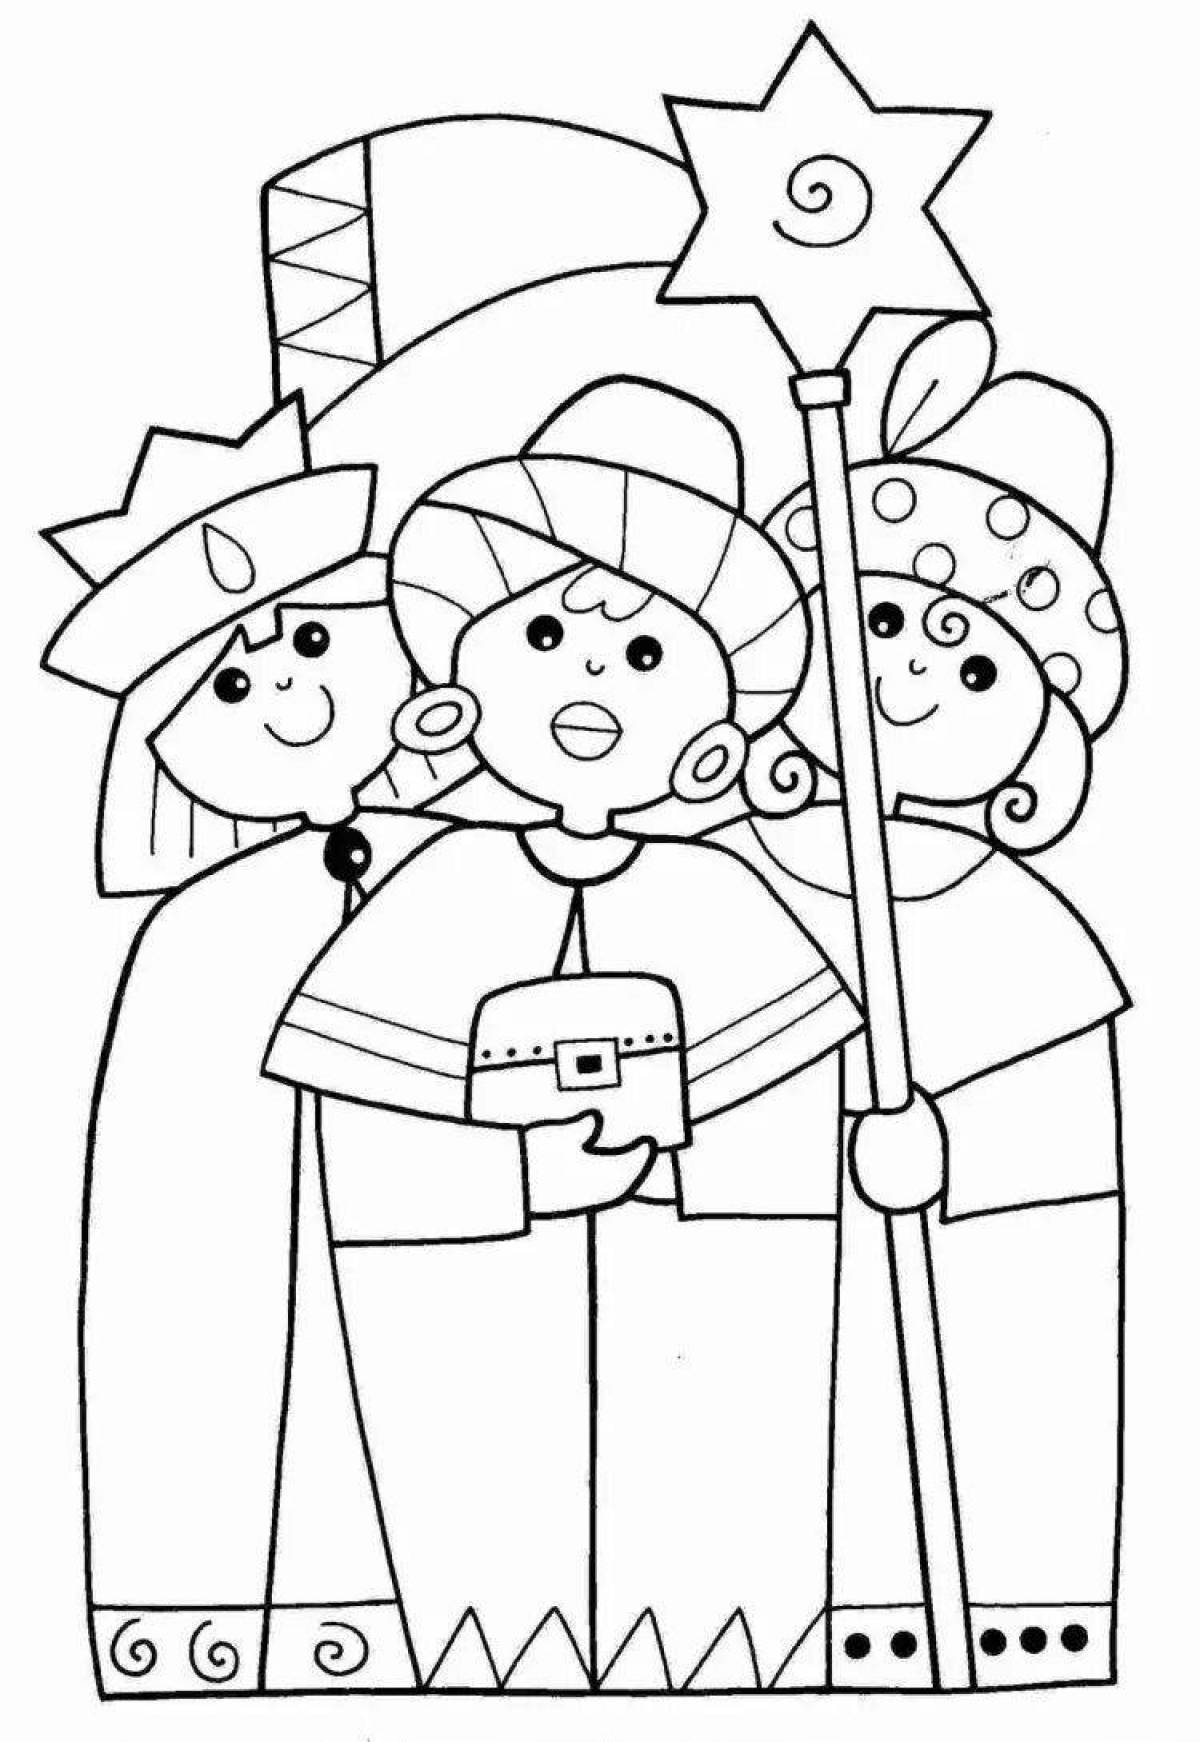 Coloring carols for children 4-5 years old